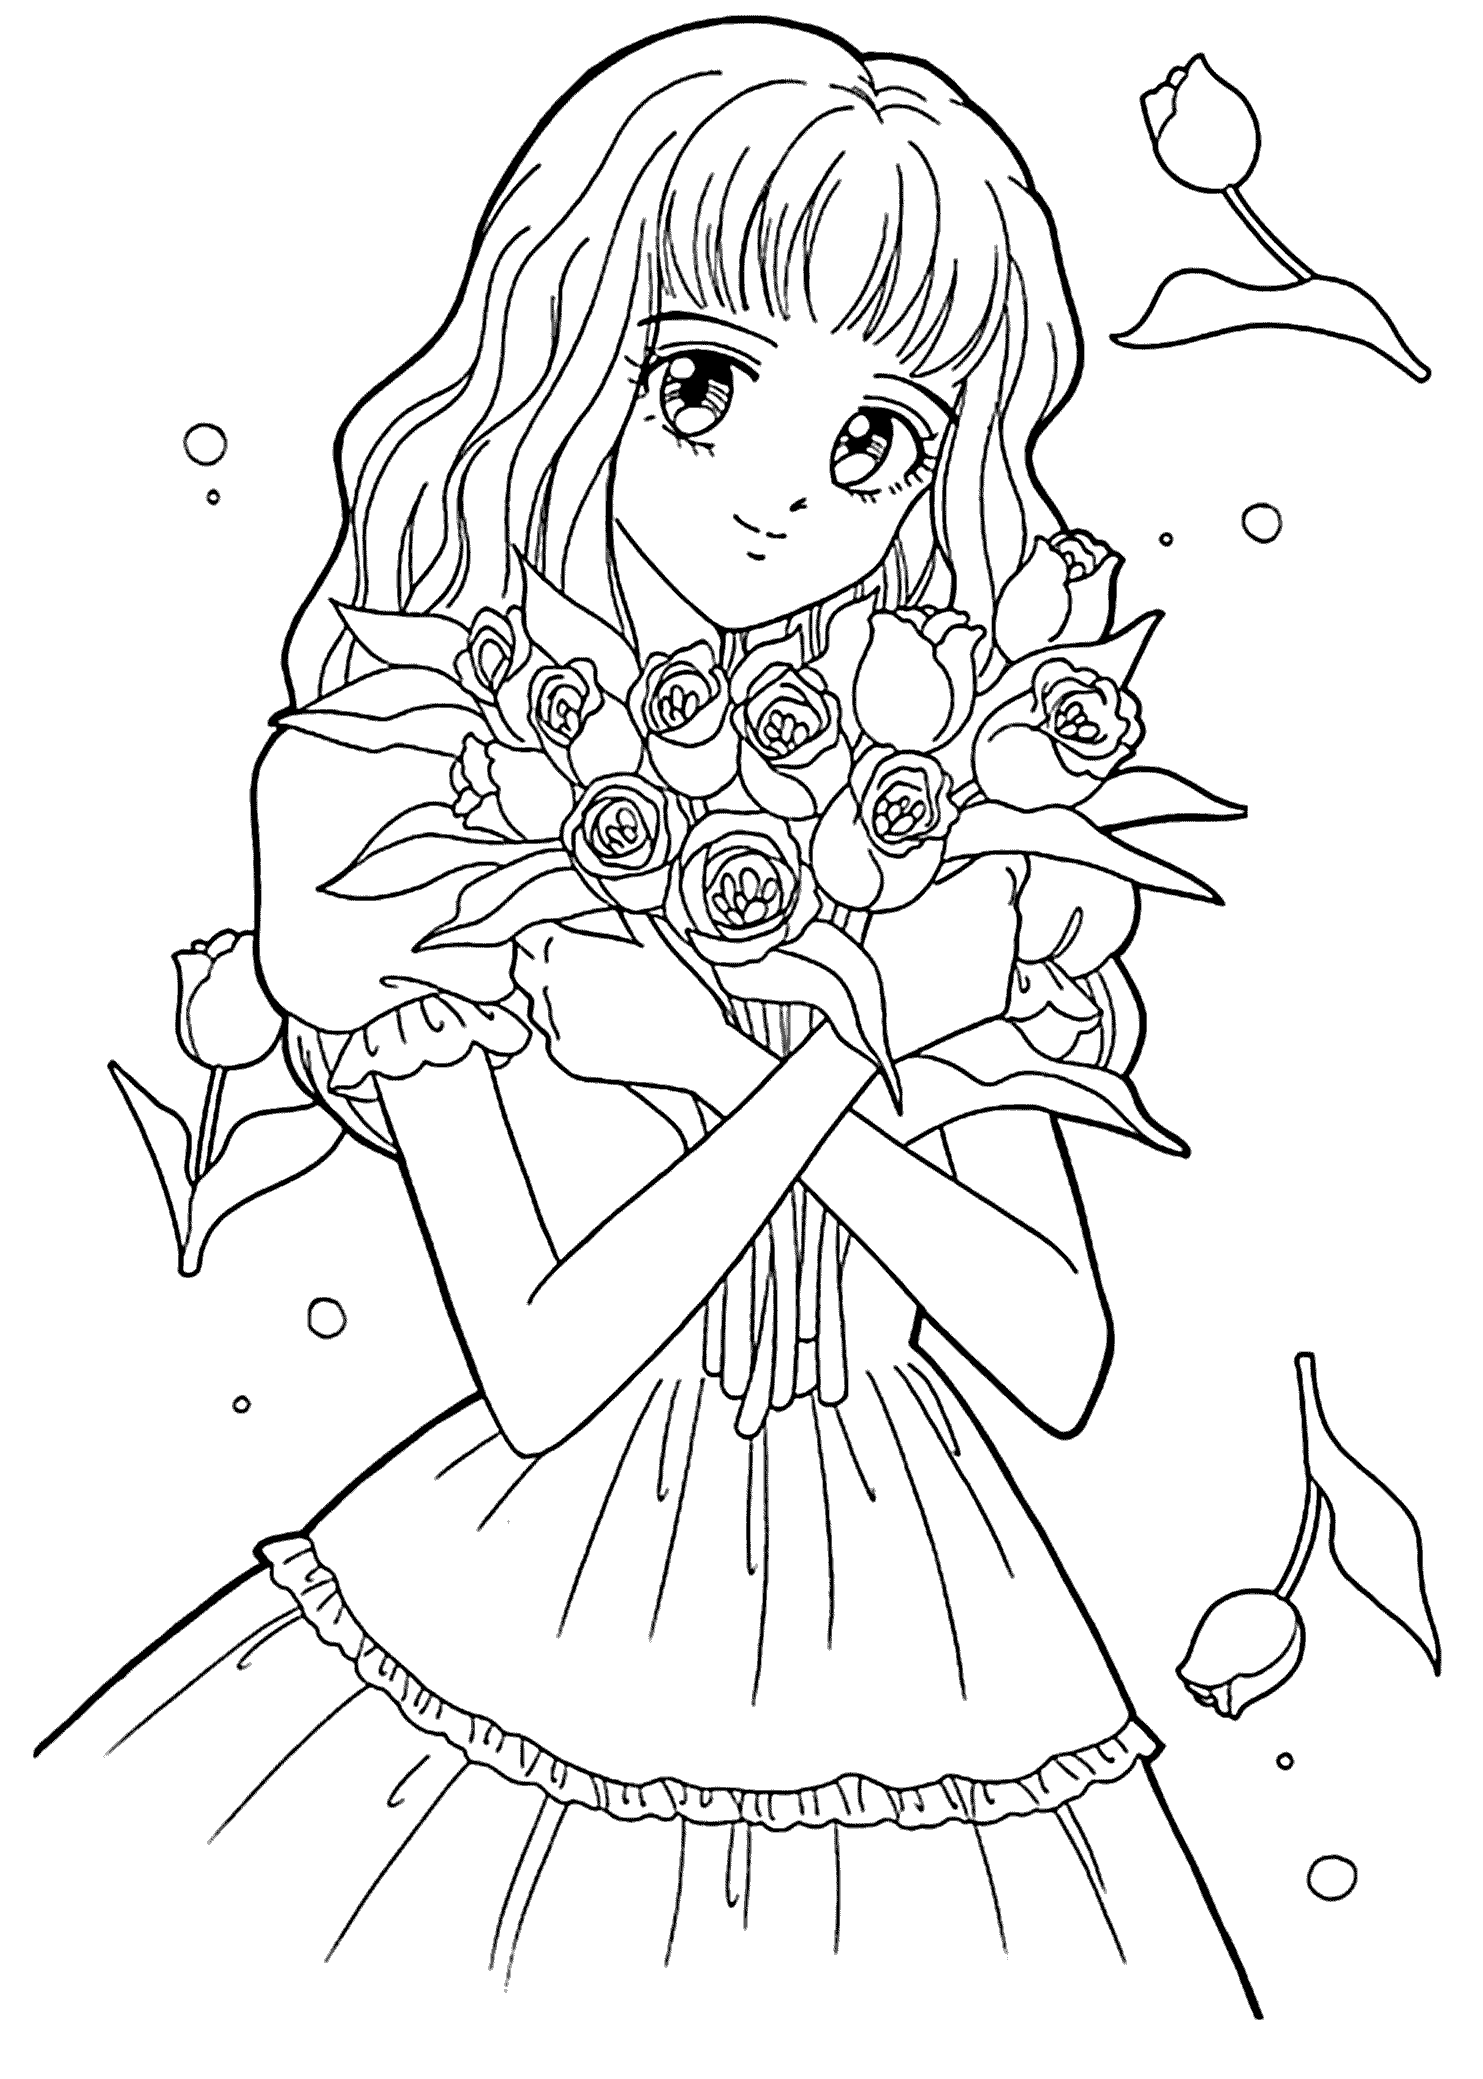 coloring pages manga manga coloring pages to download and print for free pages coloring manga 